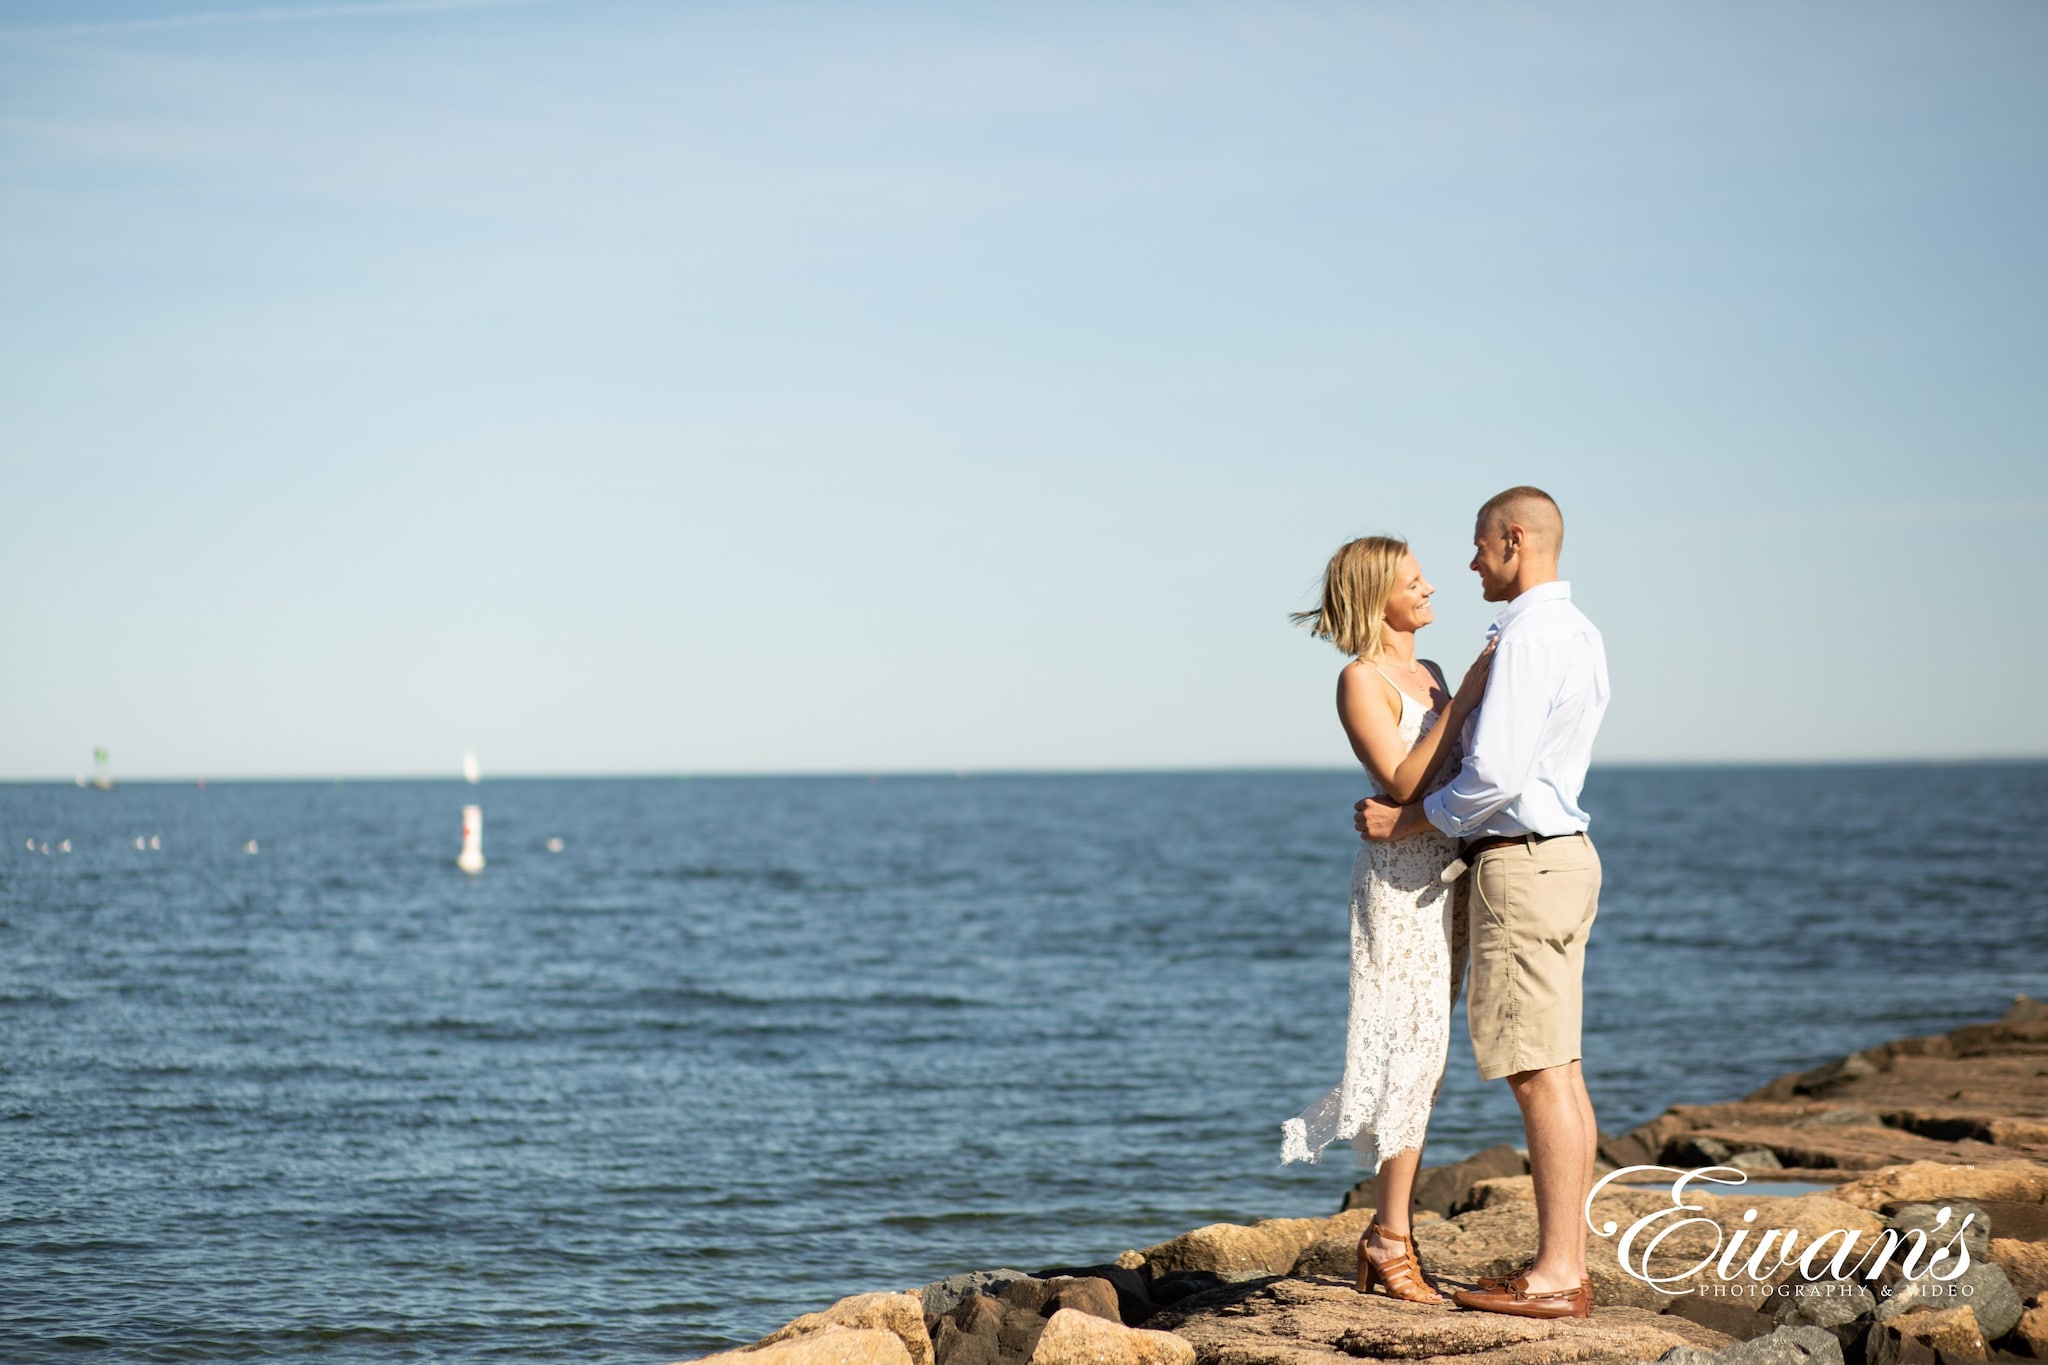 Engagement Photos At The Beach 006